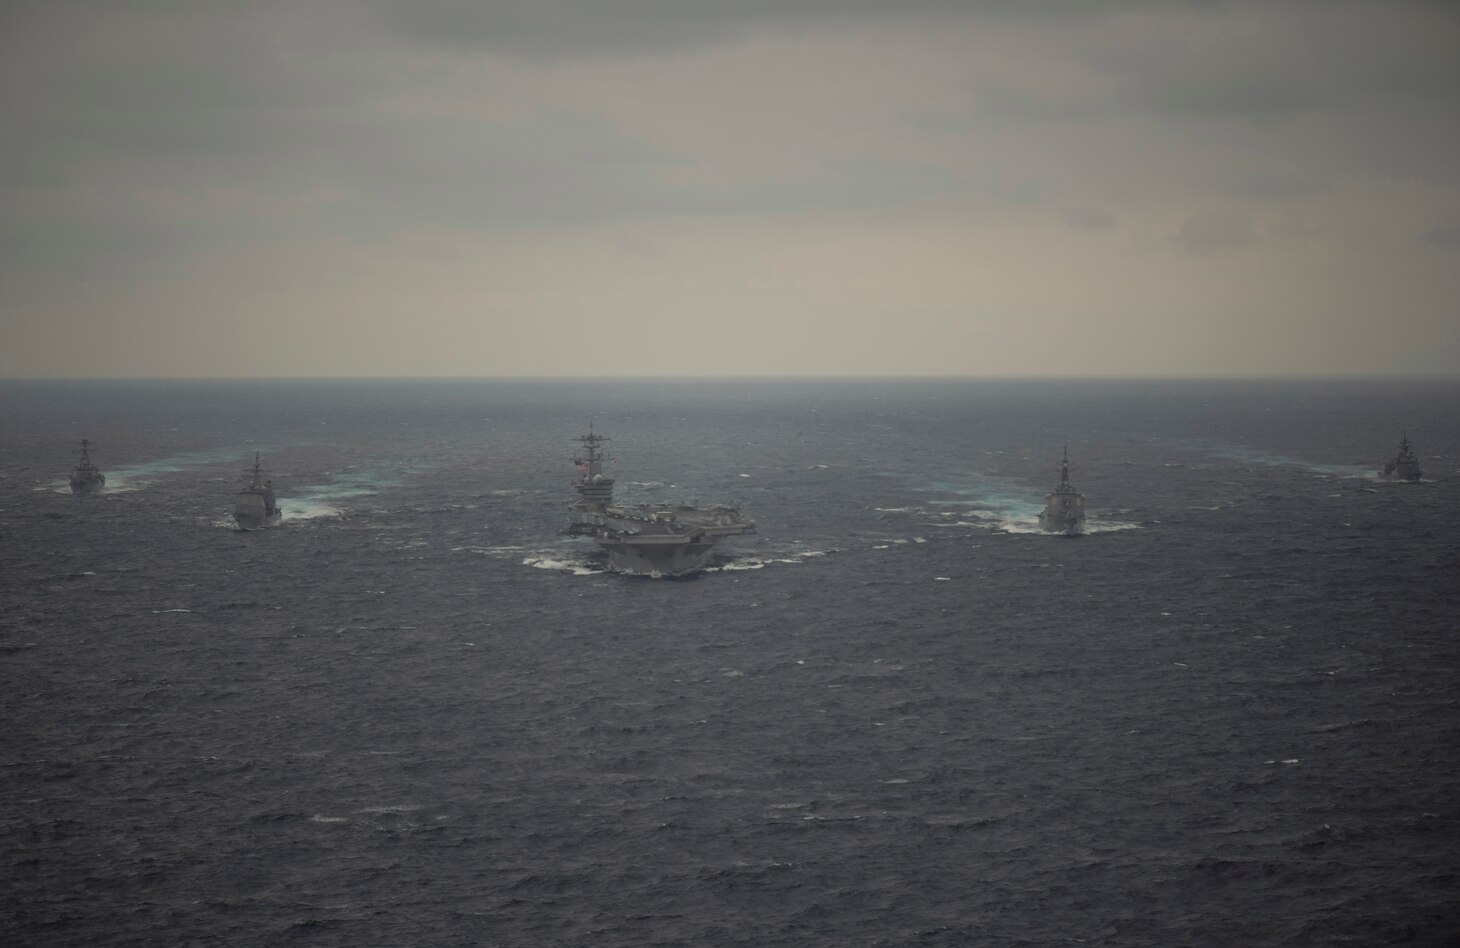 PACIFIC OCEAN (Jan. 15, 2021) – The Arleigh Burke-class guided-missile destroyer USS John Finn (DDG 113), left, Ticonderoga-class guided-missile cruiser USS Bunker Hill (CG 52), left center, the aircraft carrier USS Theodore Roosevelt (CVN 71), center, Japan Maritime Self-Defense Force Kongo-class guided-missile destroyer JS Kongo (DDG 173), right center, and JMSDF Asahi-class destroyer JS Asahi (DD 119) transit the Pacific Ocean Jan. 15, 2021. The Theodore Roosevelt Carrier Strike Group is on a scheduled deployment to the U.S. 7th Fleet area of operations. As the U.S. Navy's largest forward deployed fleet, with its approximate 50-70 ships and submarines, 140 aircraft, and 20,000 Sailors in the area of operations at any given time, 7th Fleet conducts forward-deployed naval operations in support of U.S. national interests throughout a free and open Indo-Pacific area of operations to foster maritime security, promote stability, and prevent conflict alongside 35 other maritime nations and partners. (U.S. Navy photo by Mass Communication Specialist 3rd Class Brandon Richardson)